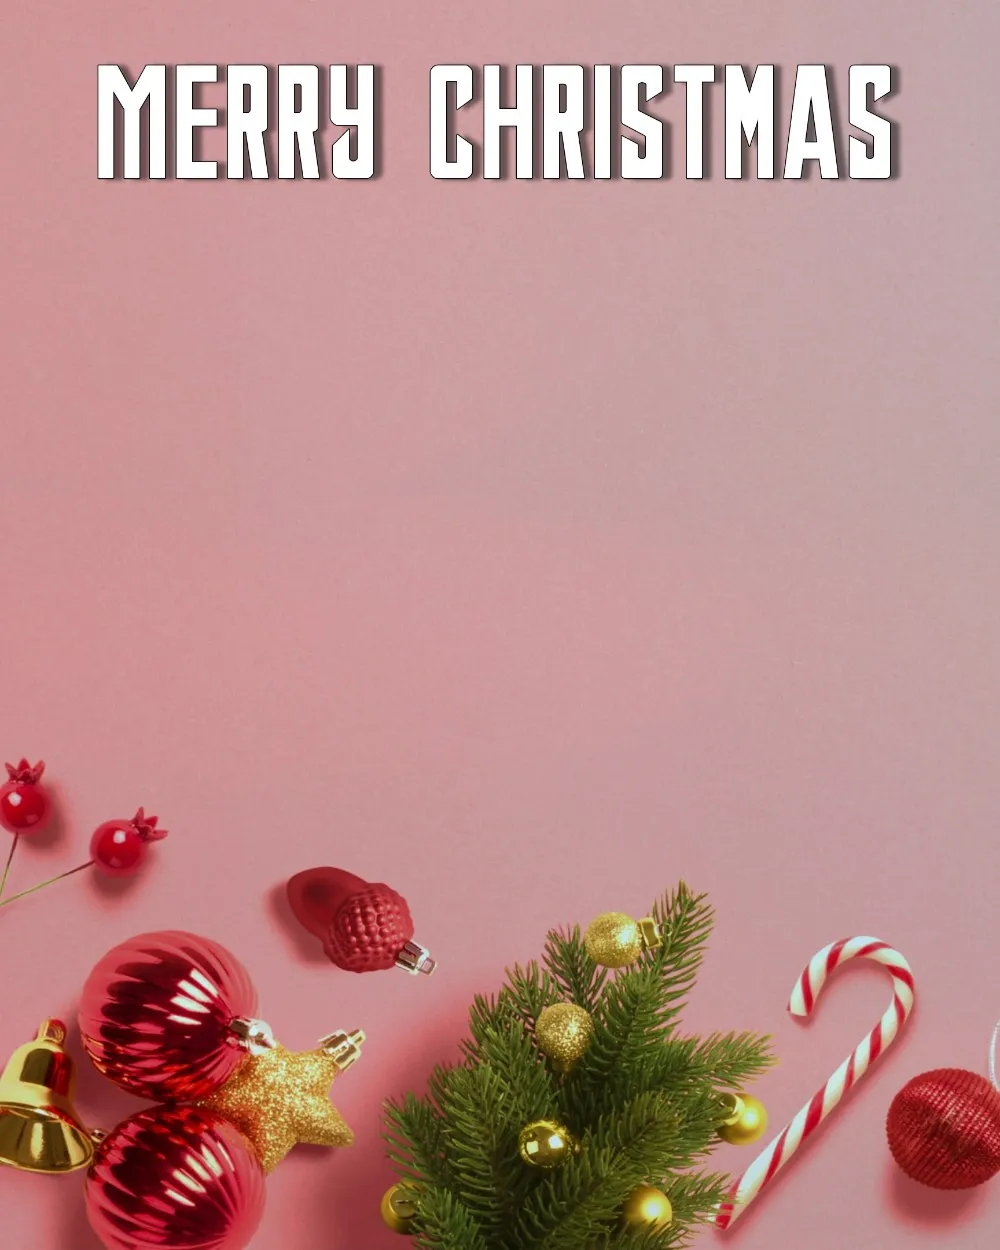 You are currently viewing Merry Christmas picture download in high quality